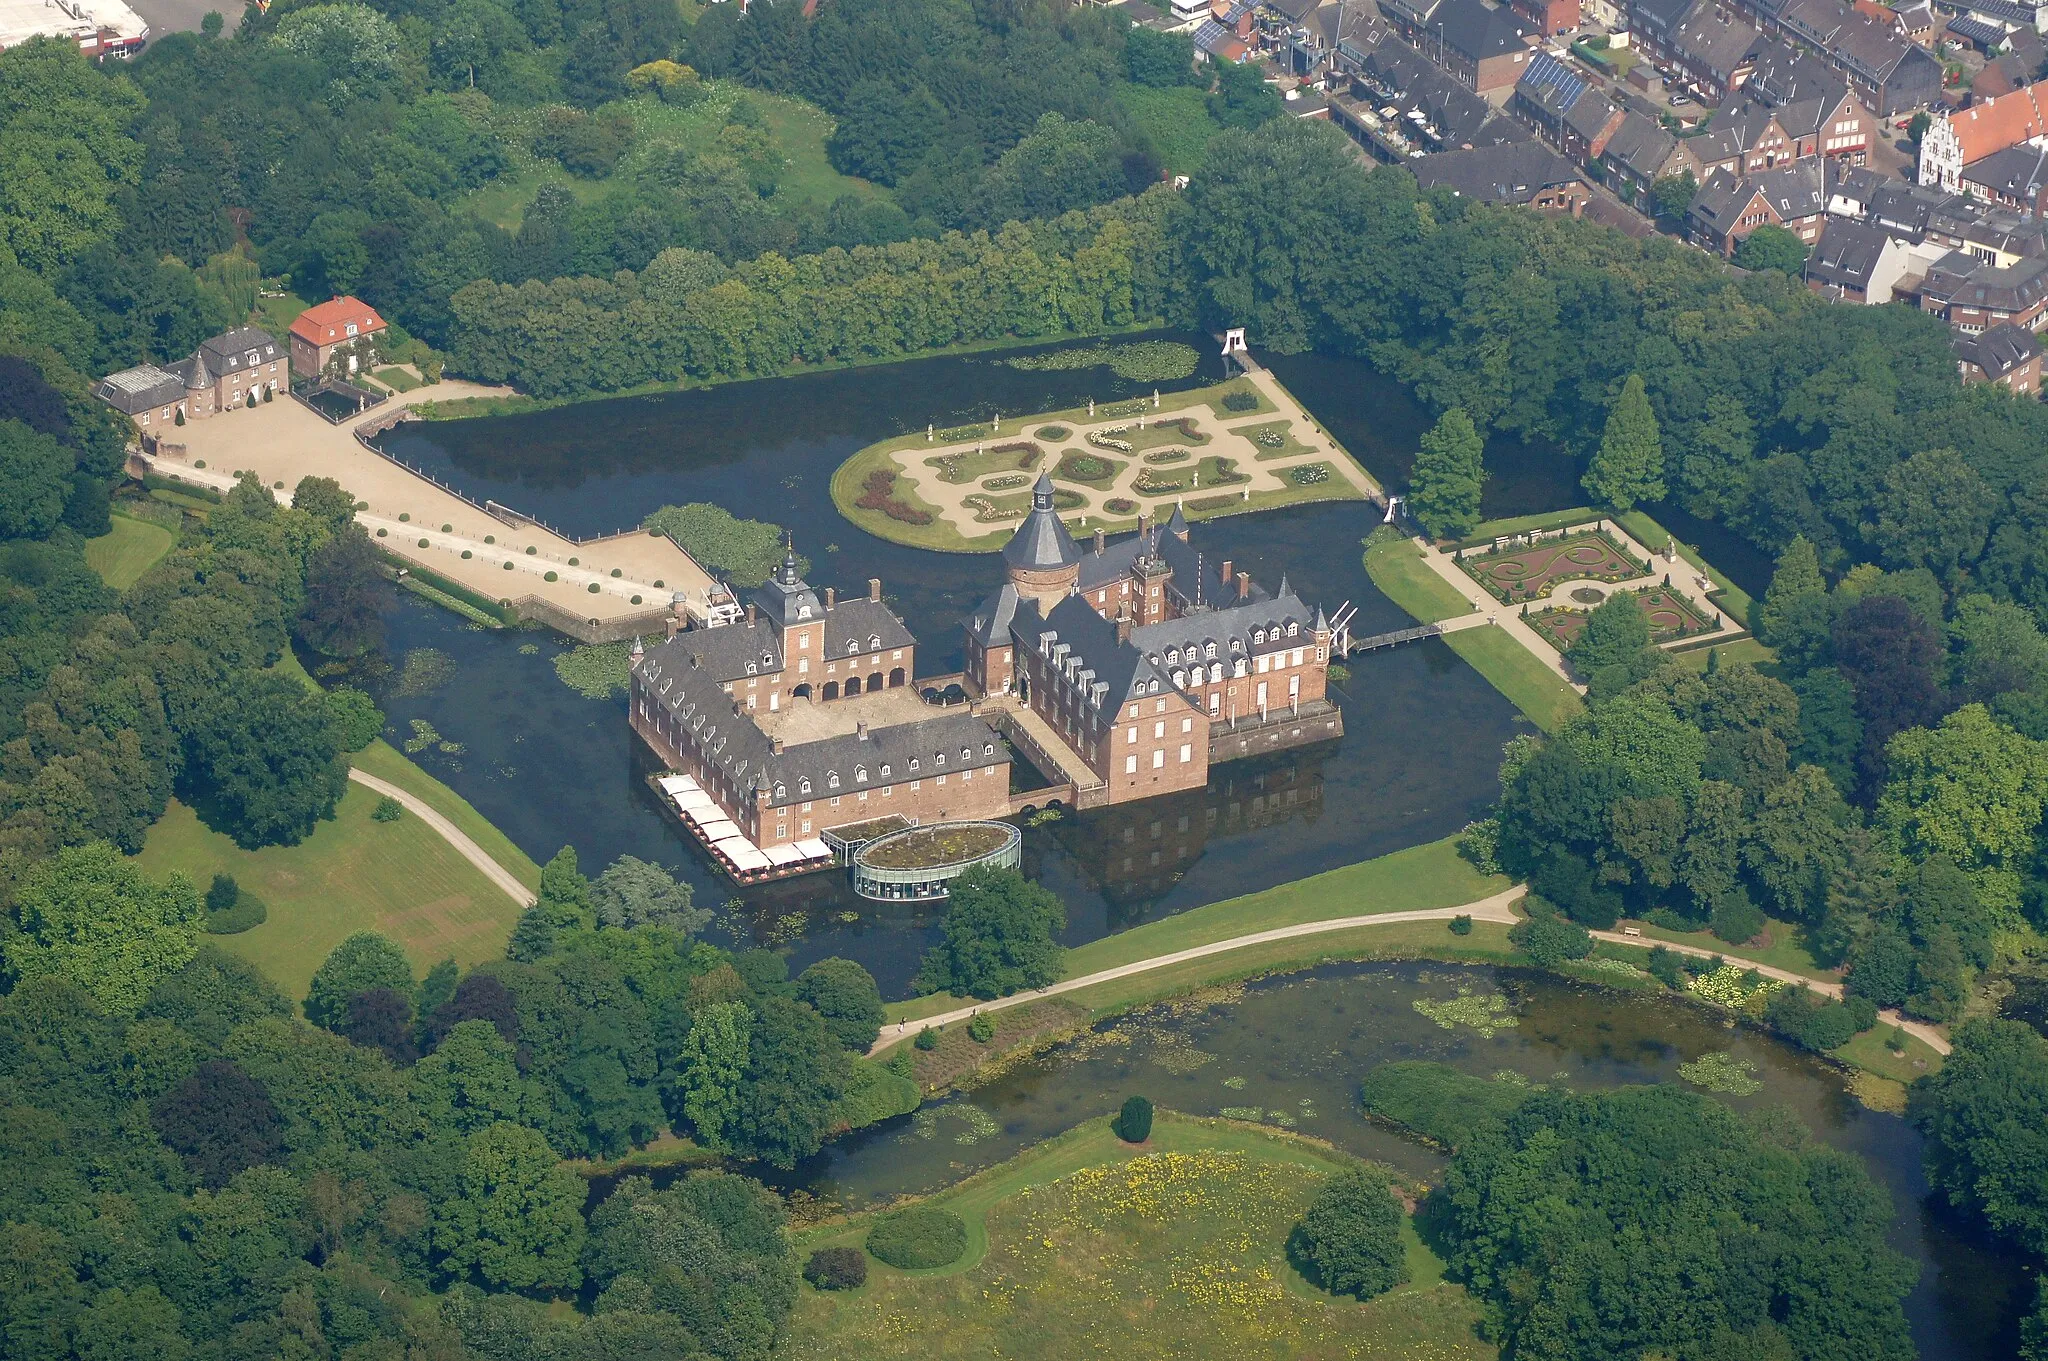 Photo showing: The castle of Anholt is situated in  Anholt, Isselburg, district of Borken in North Rhine-Westphalia, Germany.